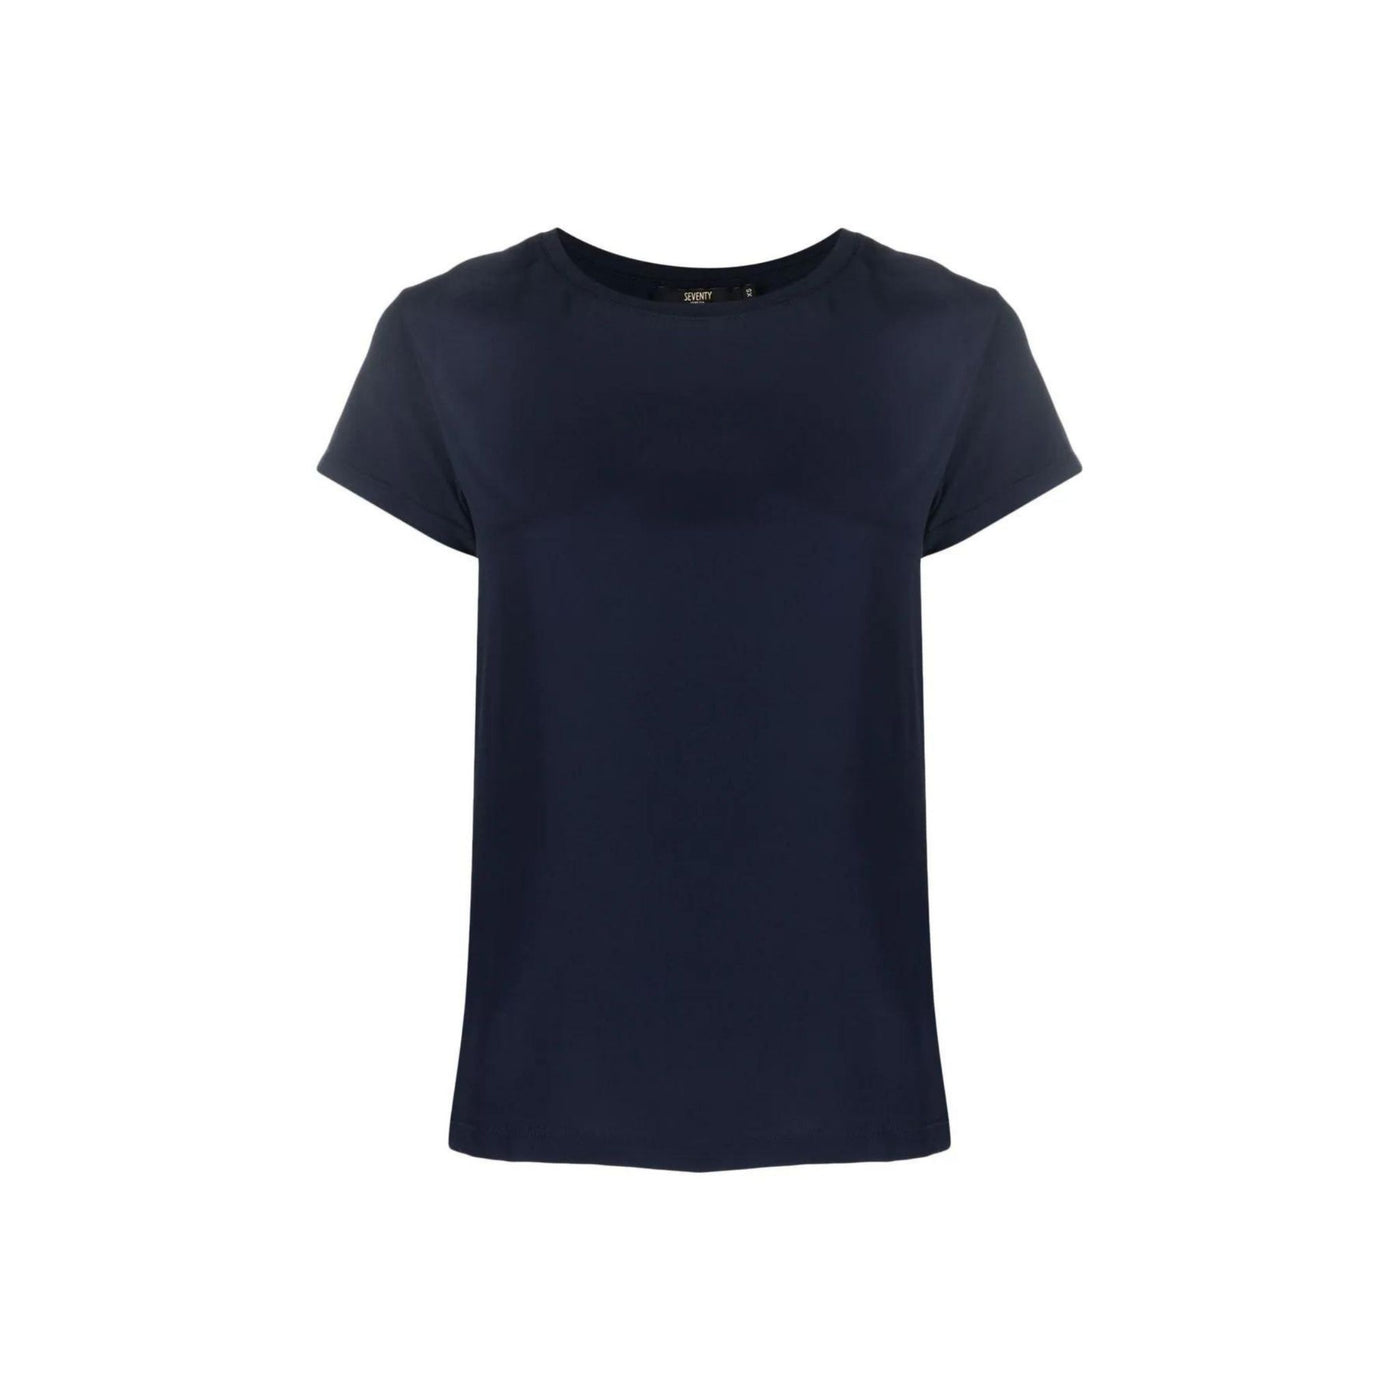 Women's T-shirt in silk and cotton mix